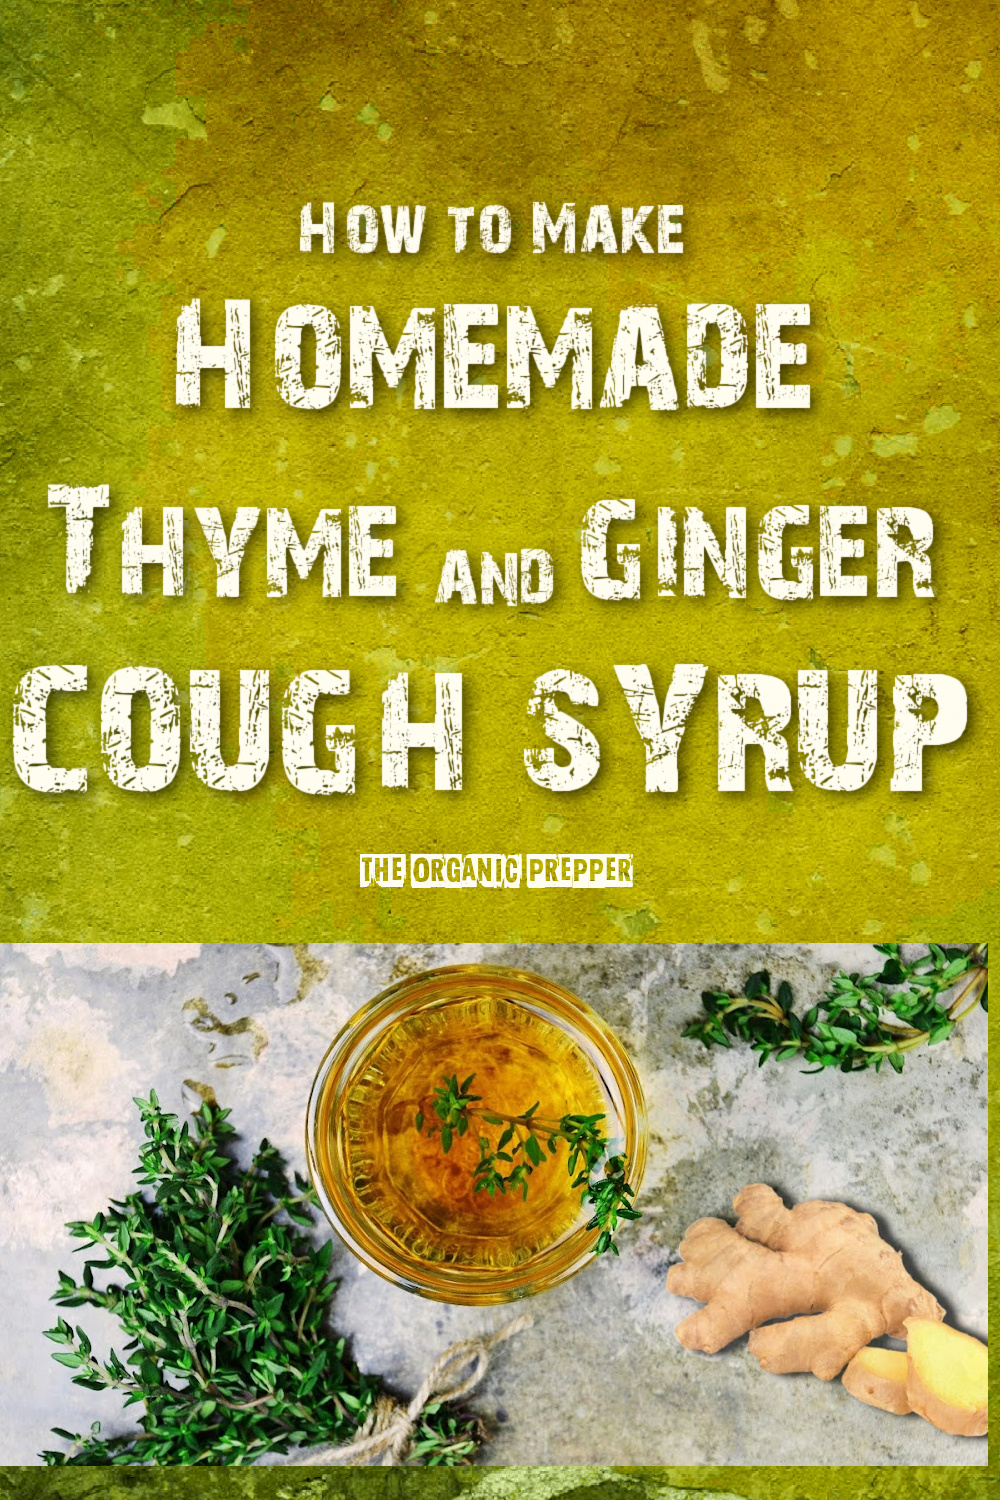 How to Make Homemade Herbal Cough Syrup